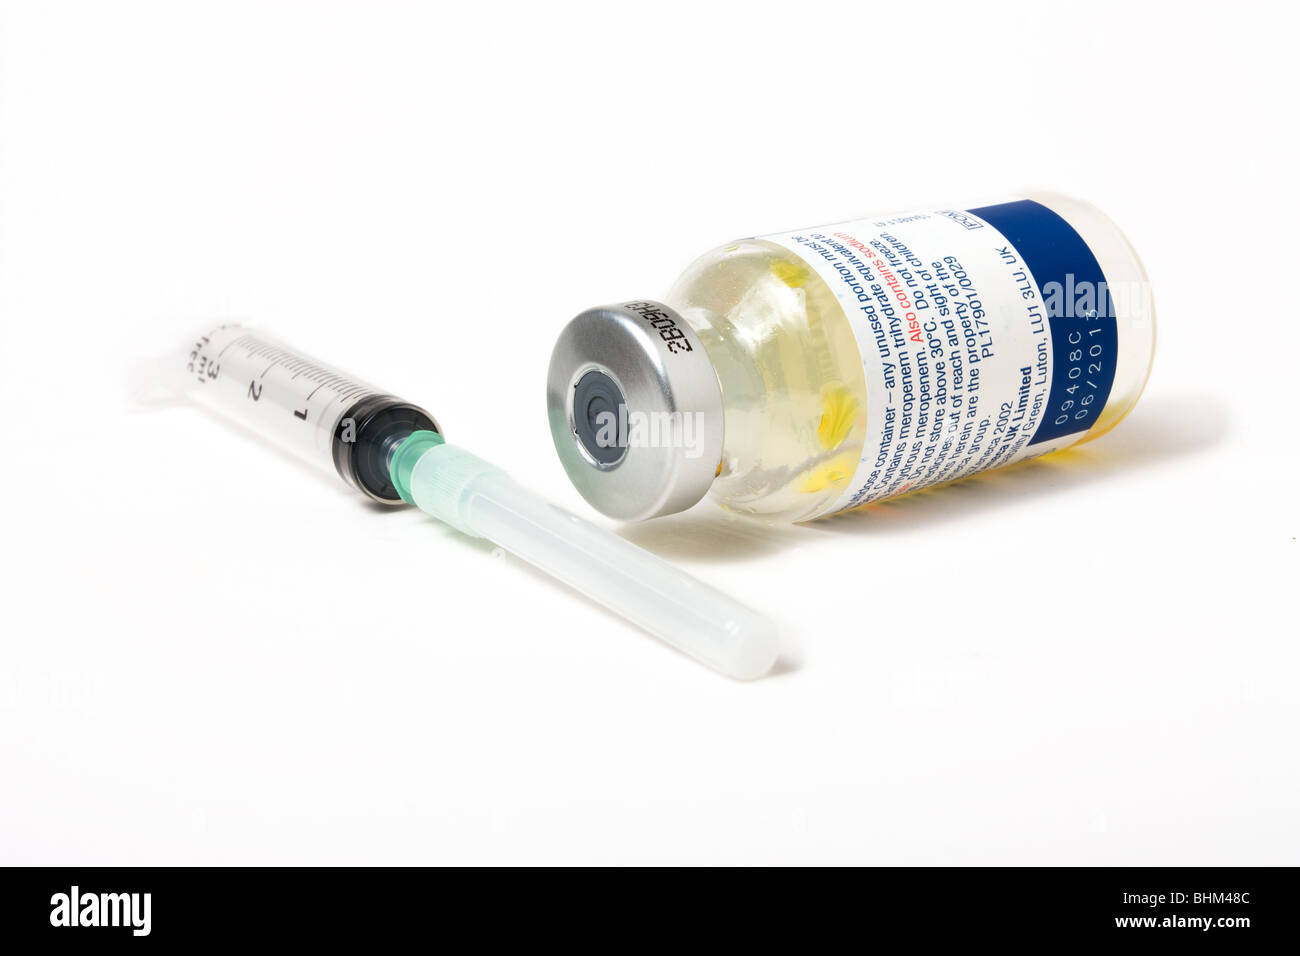 Syringe with hypodermic needle and metal topped glass closed vial drugs bottle Stock Photo